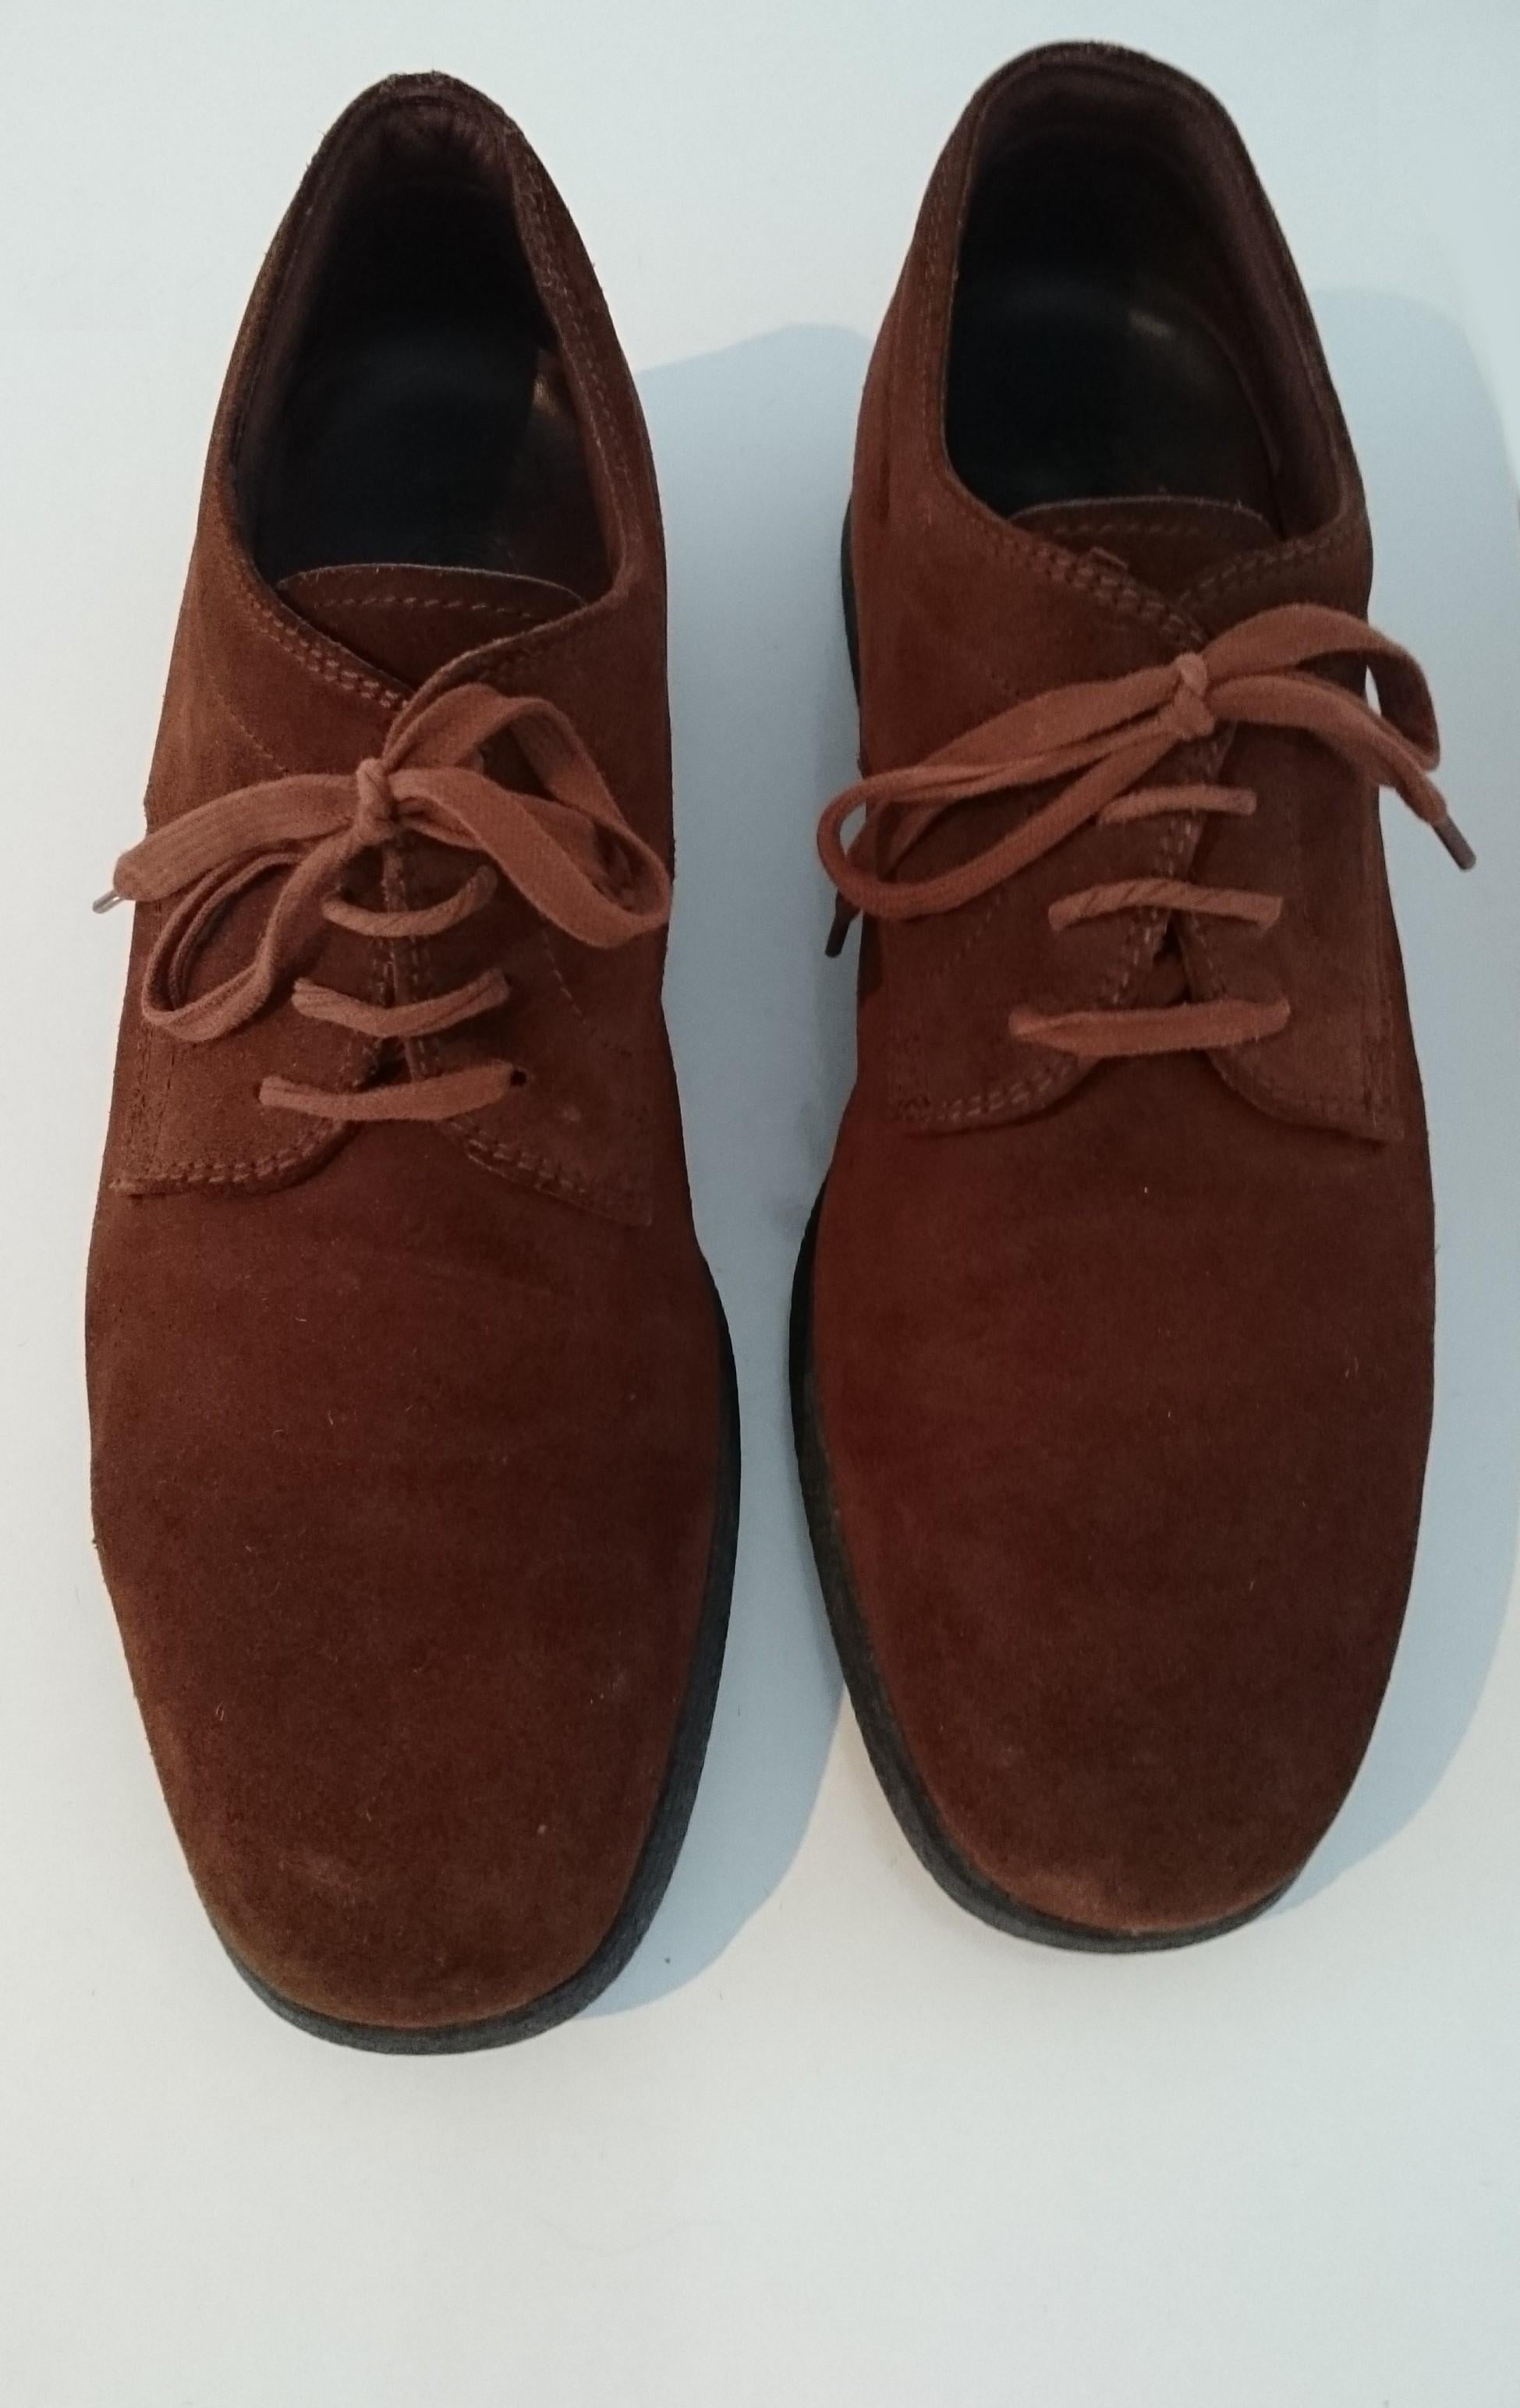 Black Tod's Brown Laced Suede Stringed Shoes. Excellent conditions. Size 8 (UK) For Sale